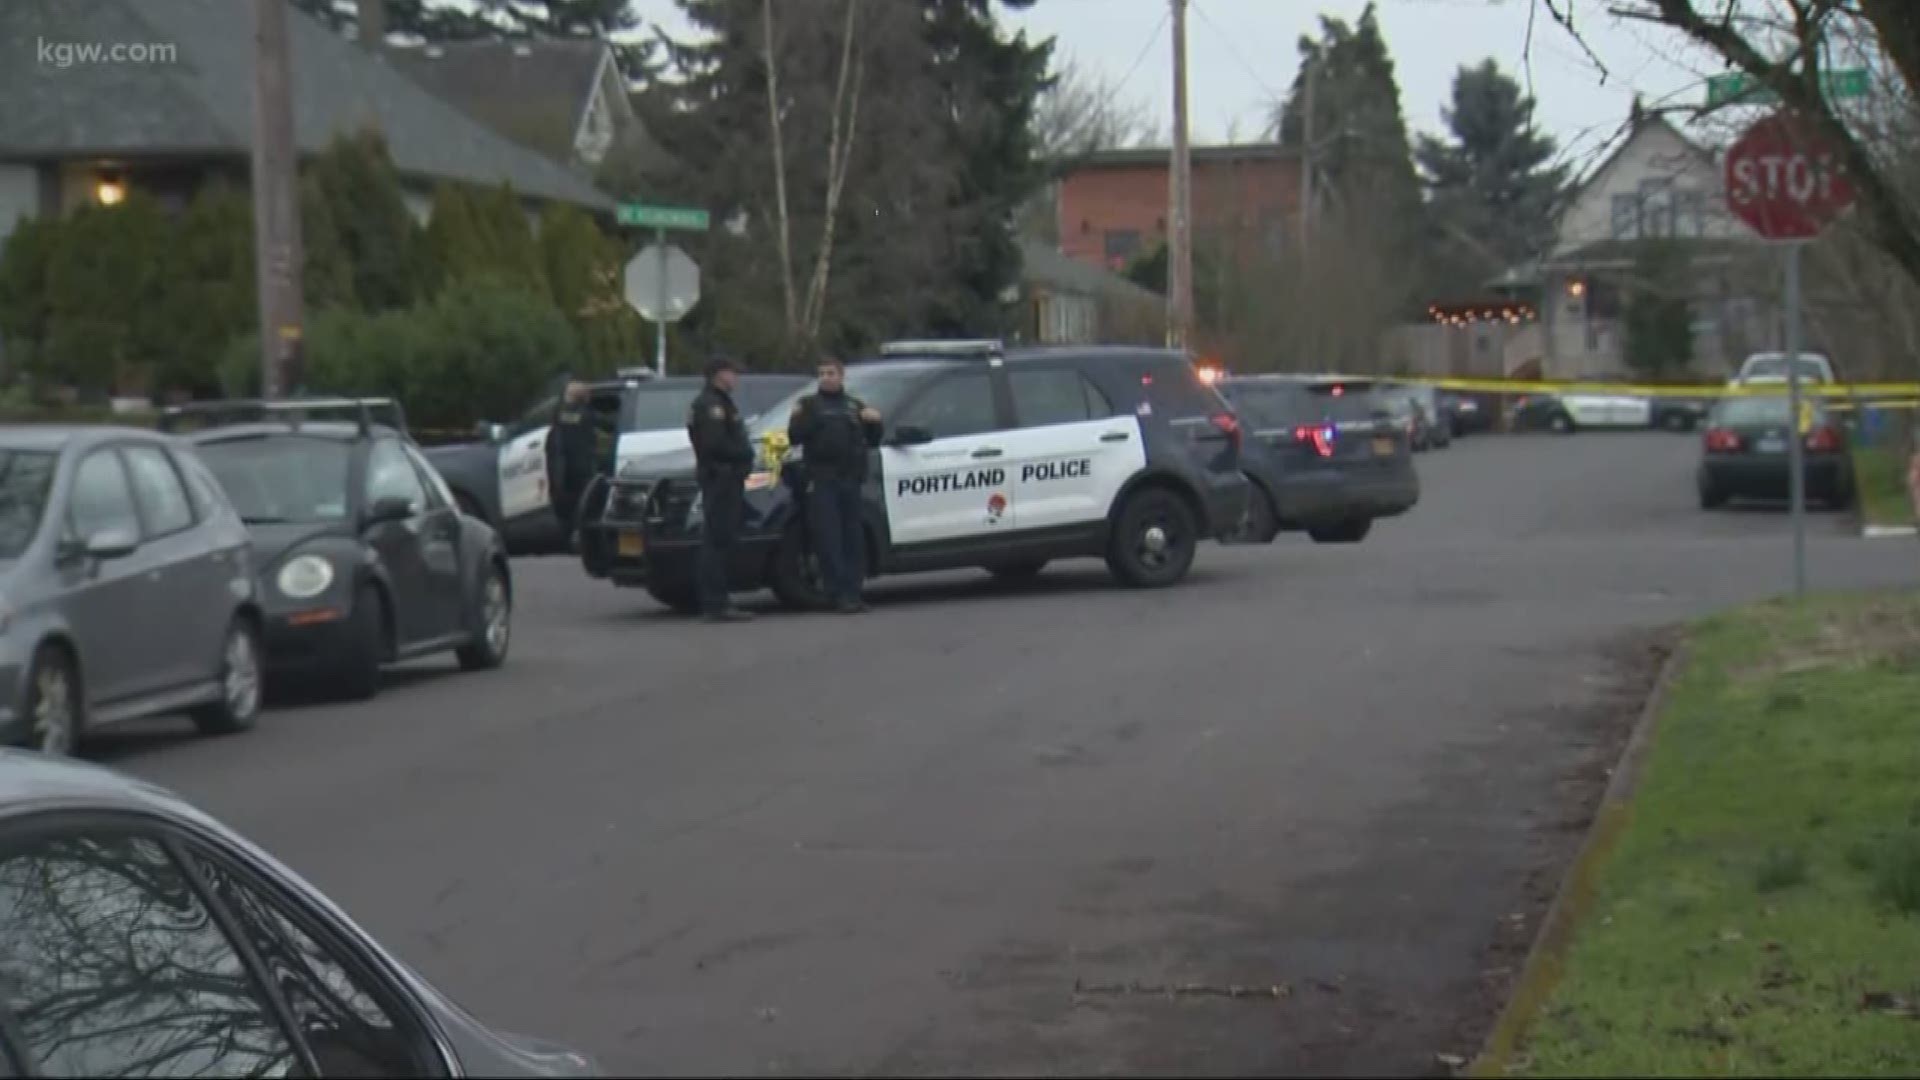 One man was wounded in the shooting near NE 10th and Killingsworth.